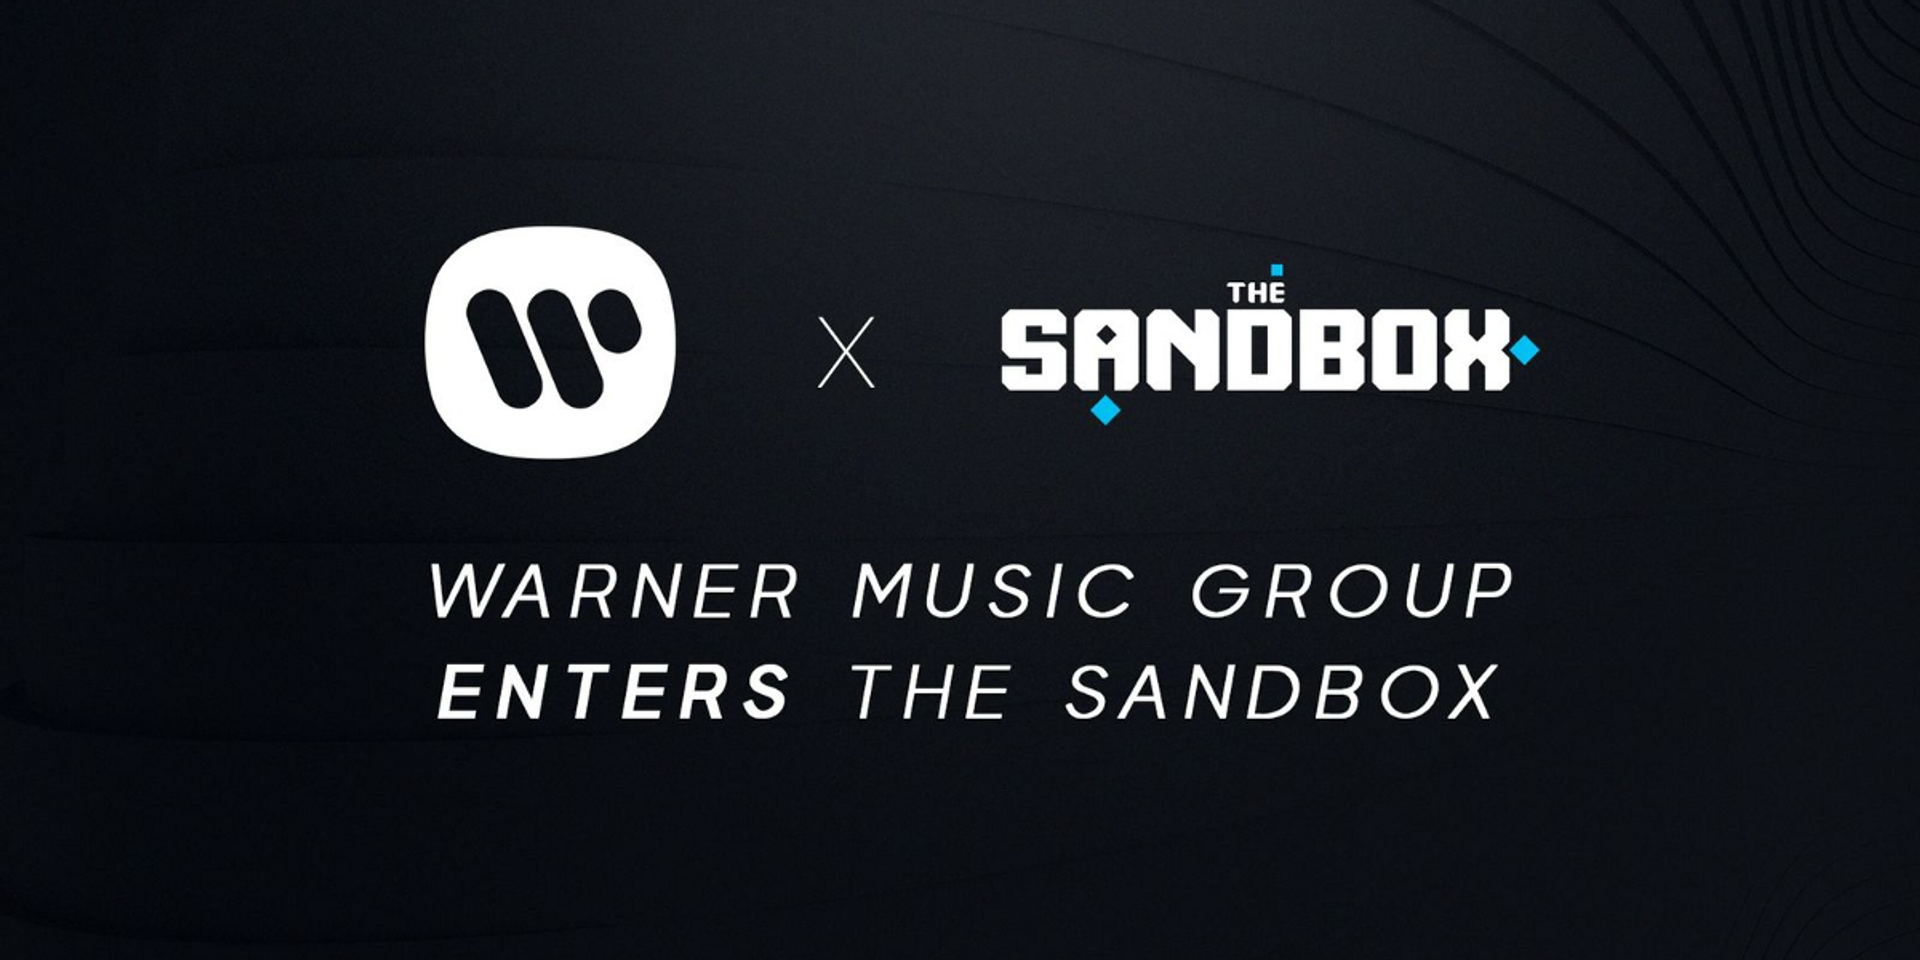 Warner Music Group enters the metaverse with The Sandbox